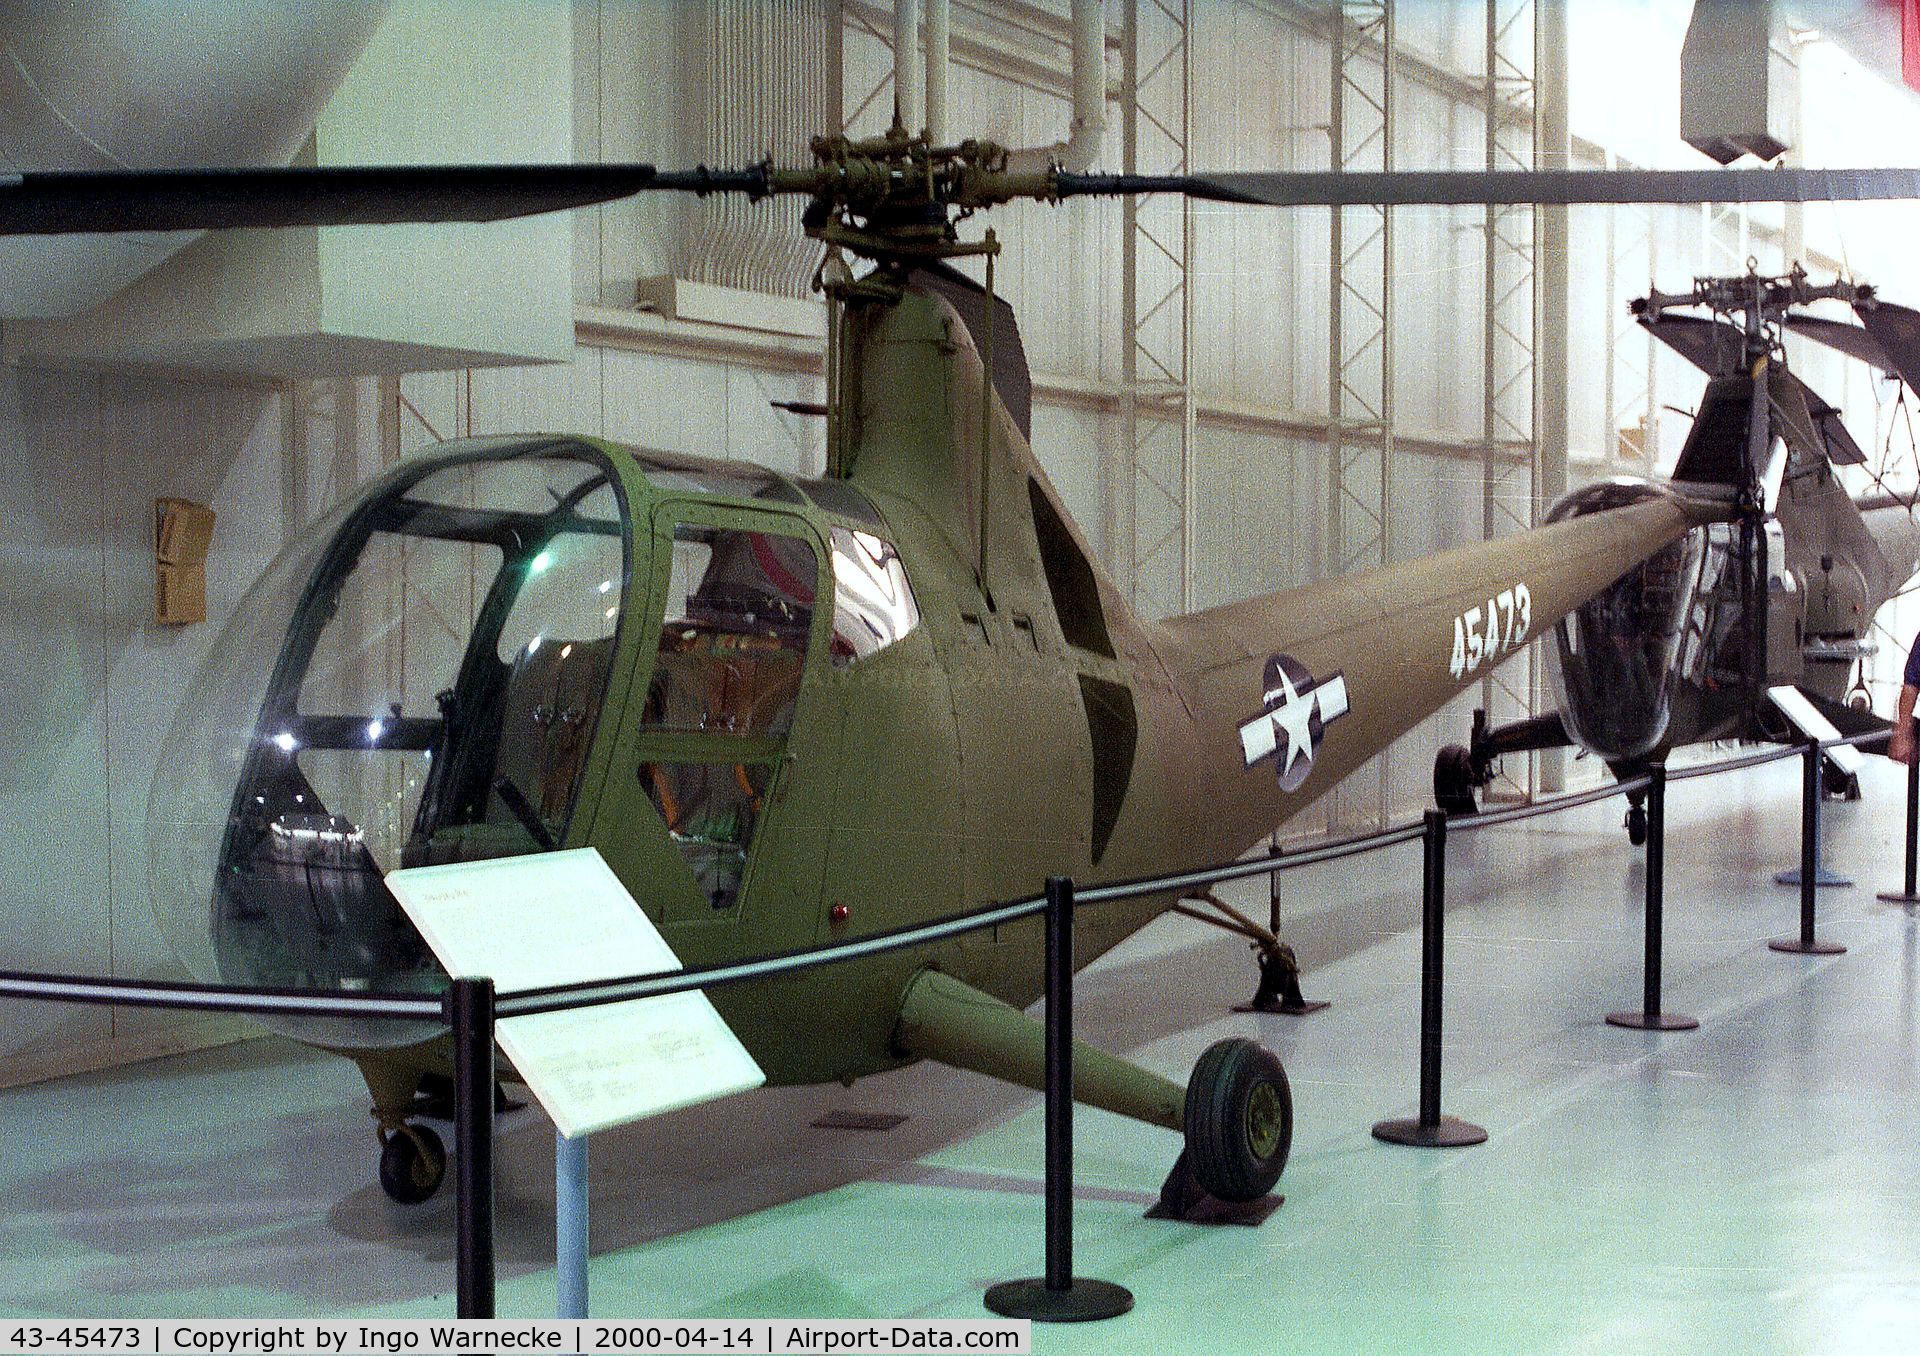 43-45473, 1944 Sikorsky R-6A Hoverfly C/N Not found 43-45473, Sikorsky R-6A Hoverfly II of the US Army Aviation at the Army Aviation Museum, Ft Rucker AL